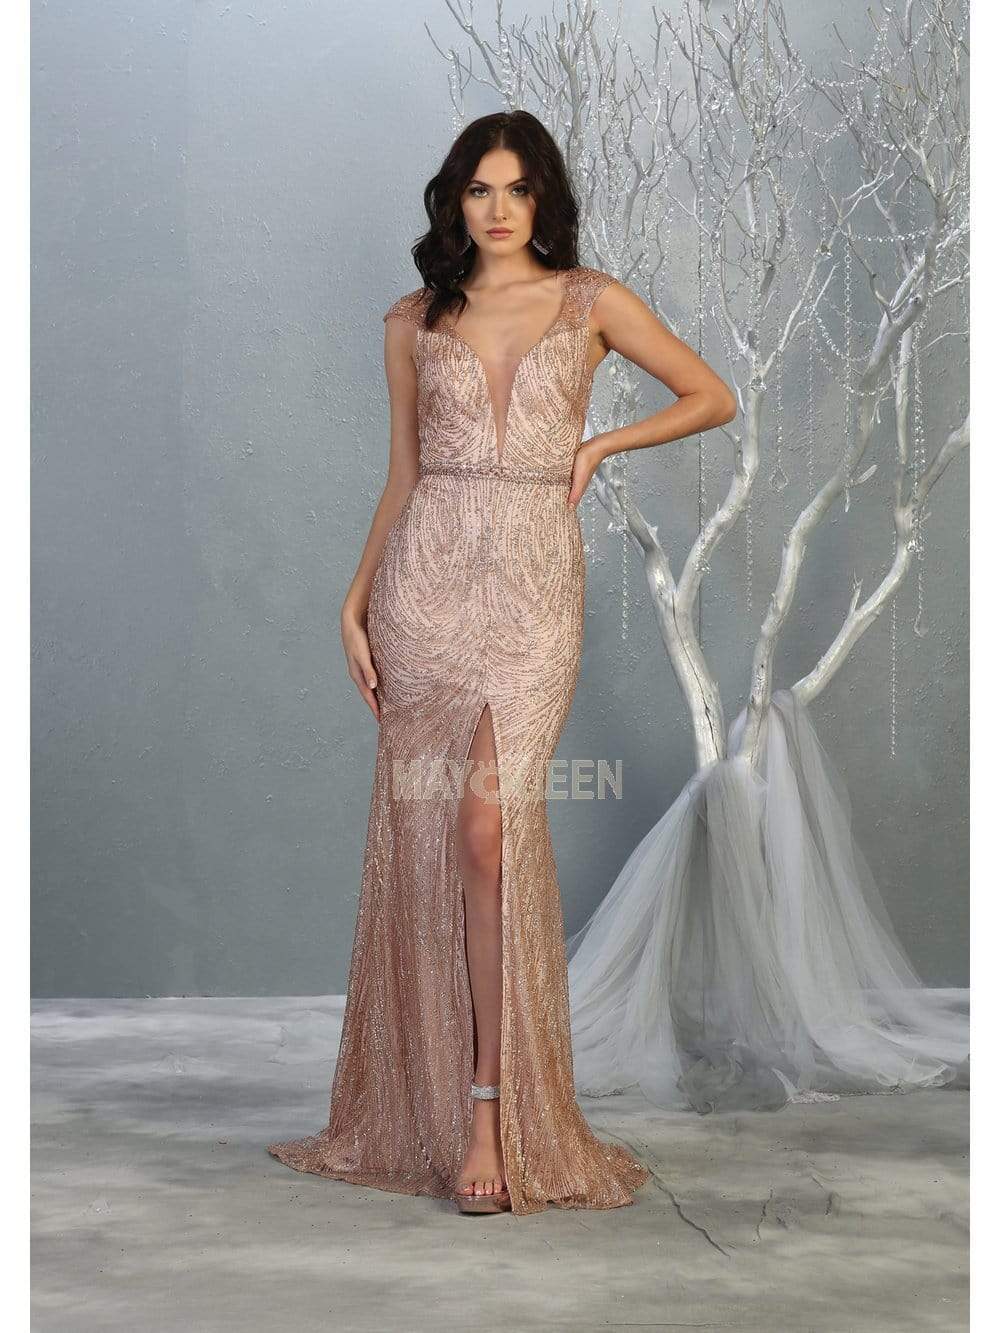 May Queen - RQ7812 Glitter Plunging V-Neck Dress with Slit Mother of the Bride Dresses 4 / Rosegold